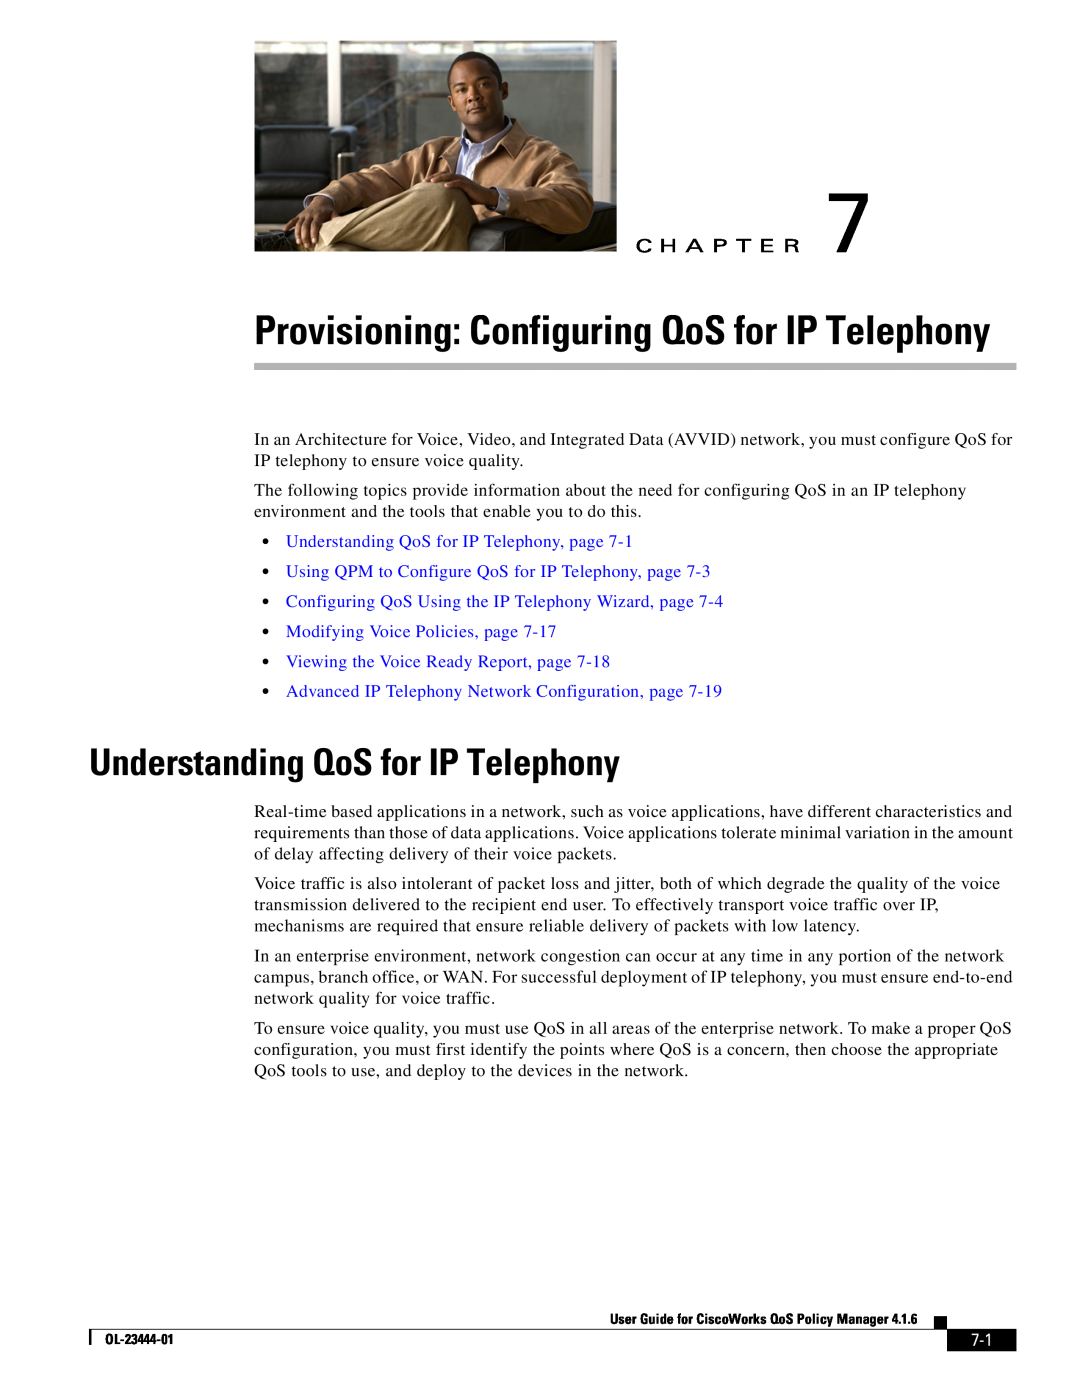 Cisco Systems 416 manual Understanding QoS for IP Telephony, page, Using QPM to Configure QoS for IP Telephony, page 